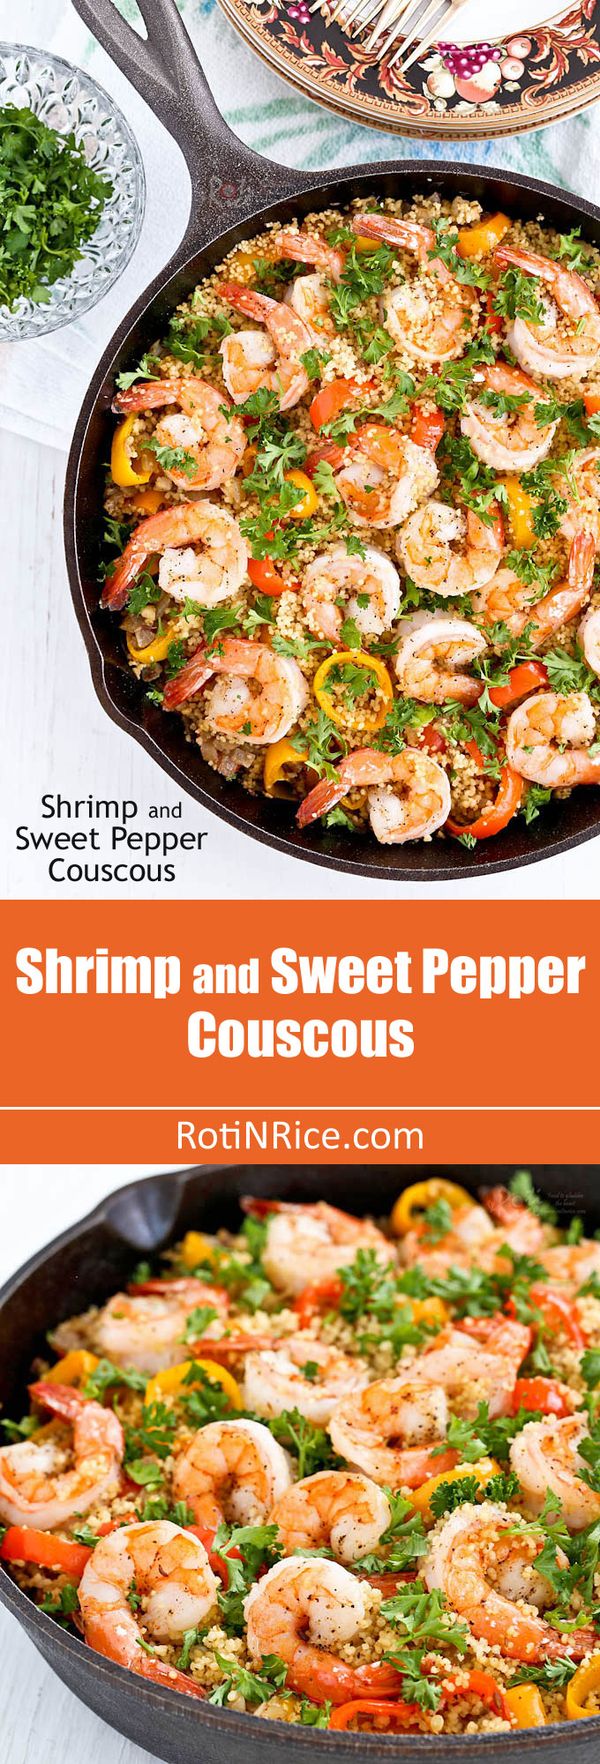 Shrimp and Sweet Pepper Couscous